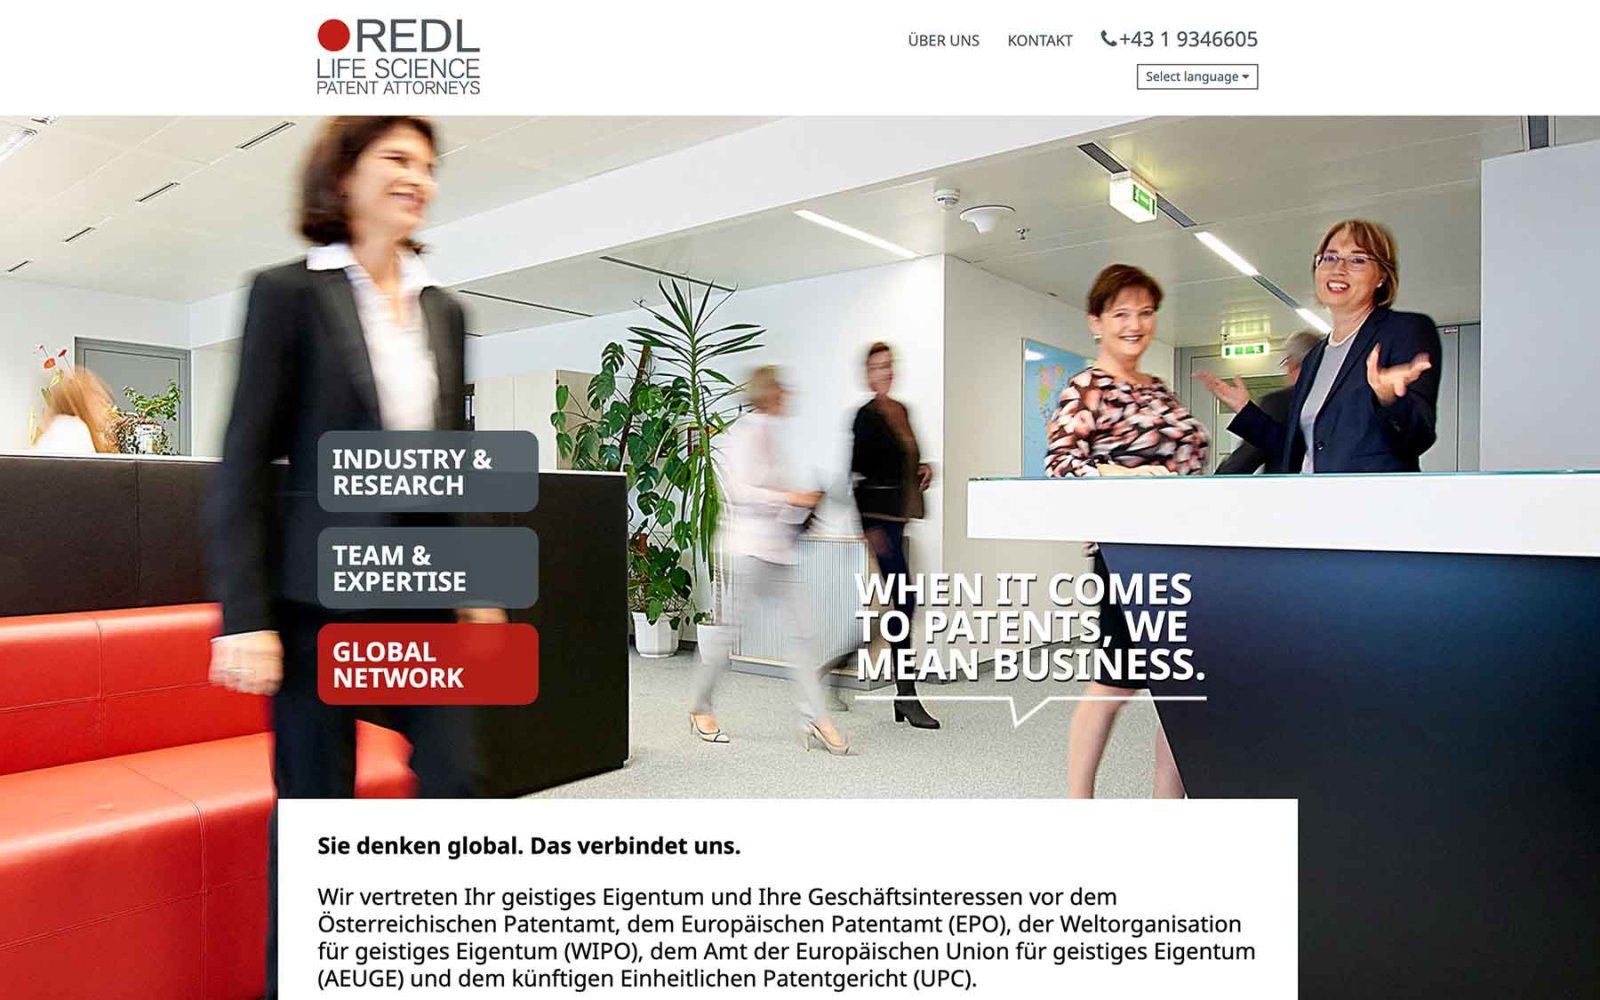 Website Redl Life Science Patent Attorneys – Global Network